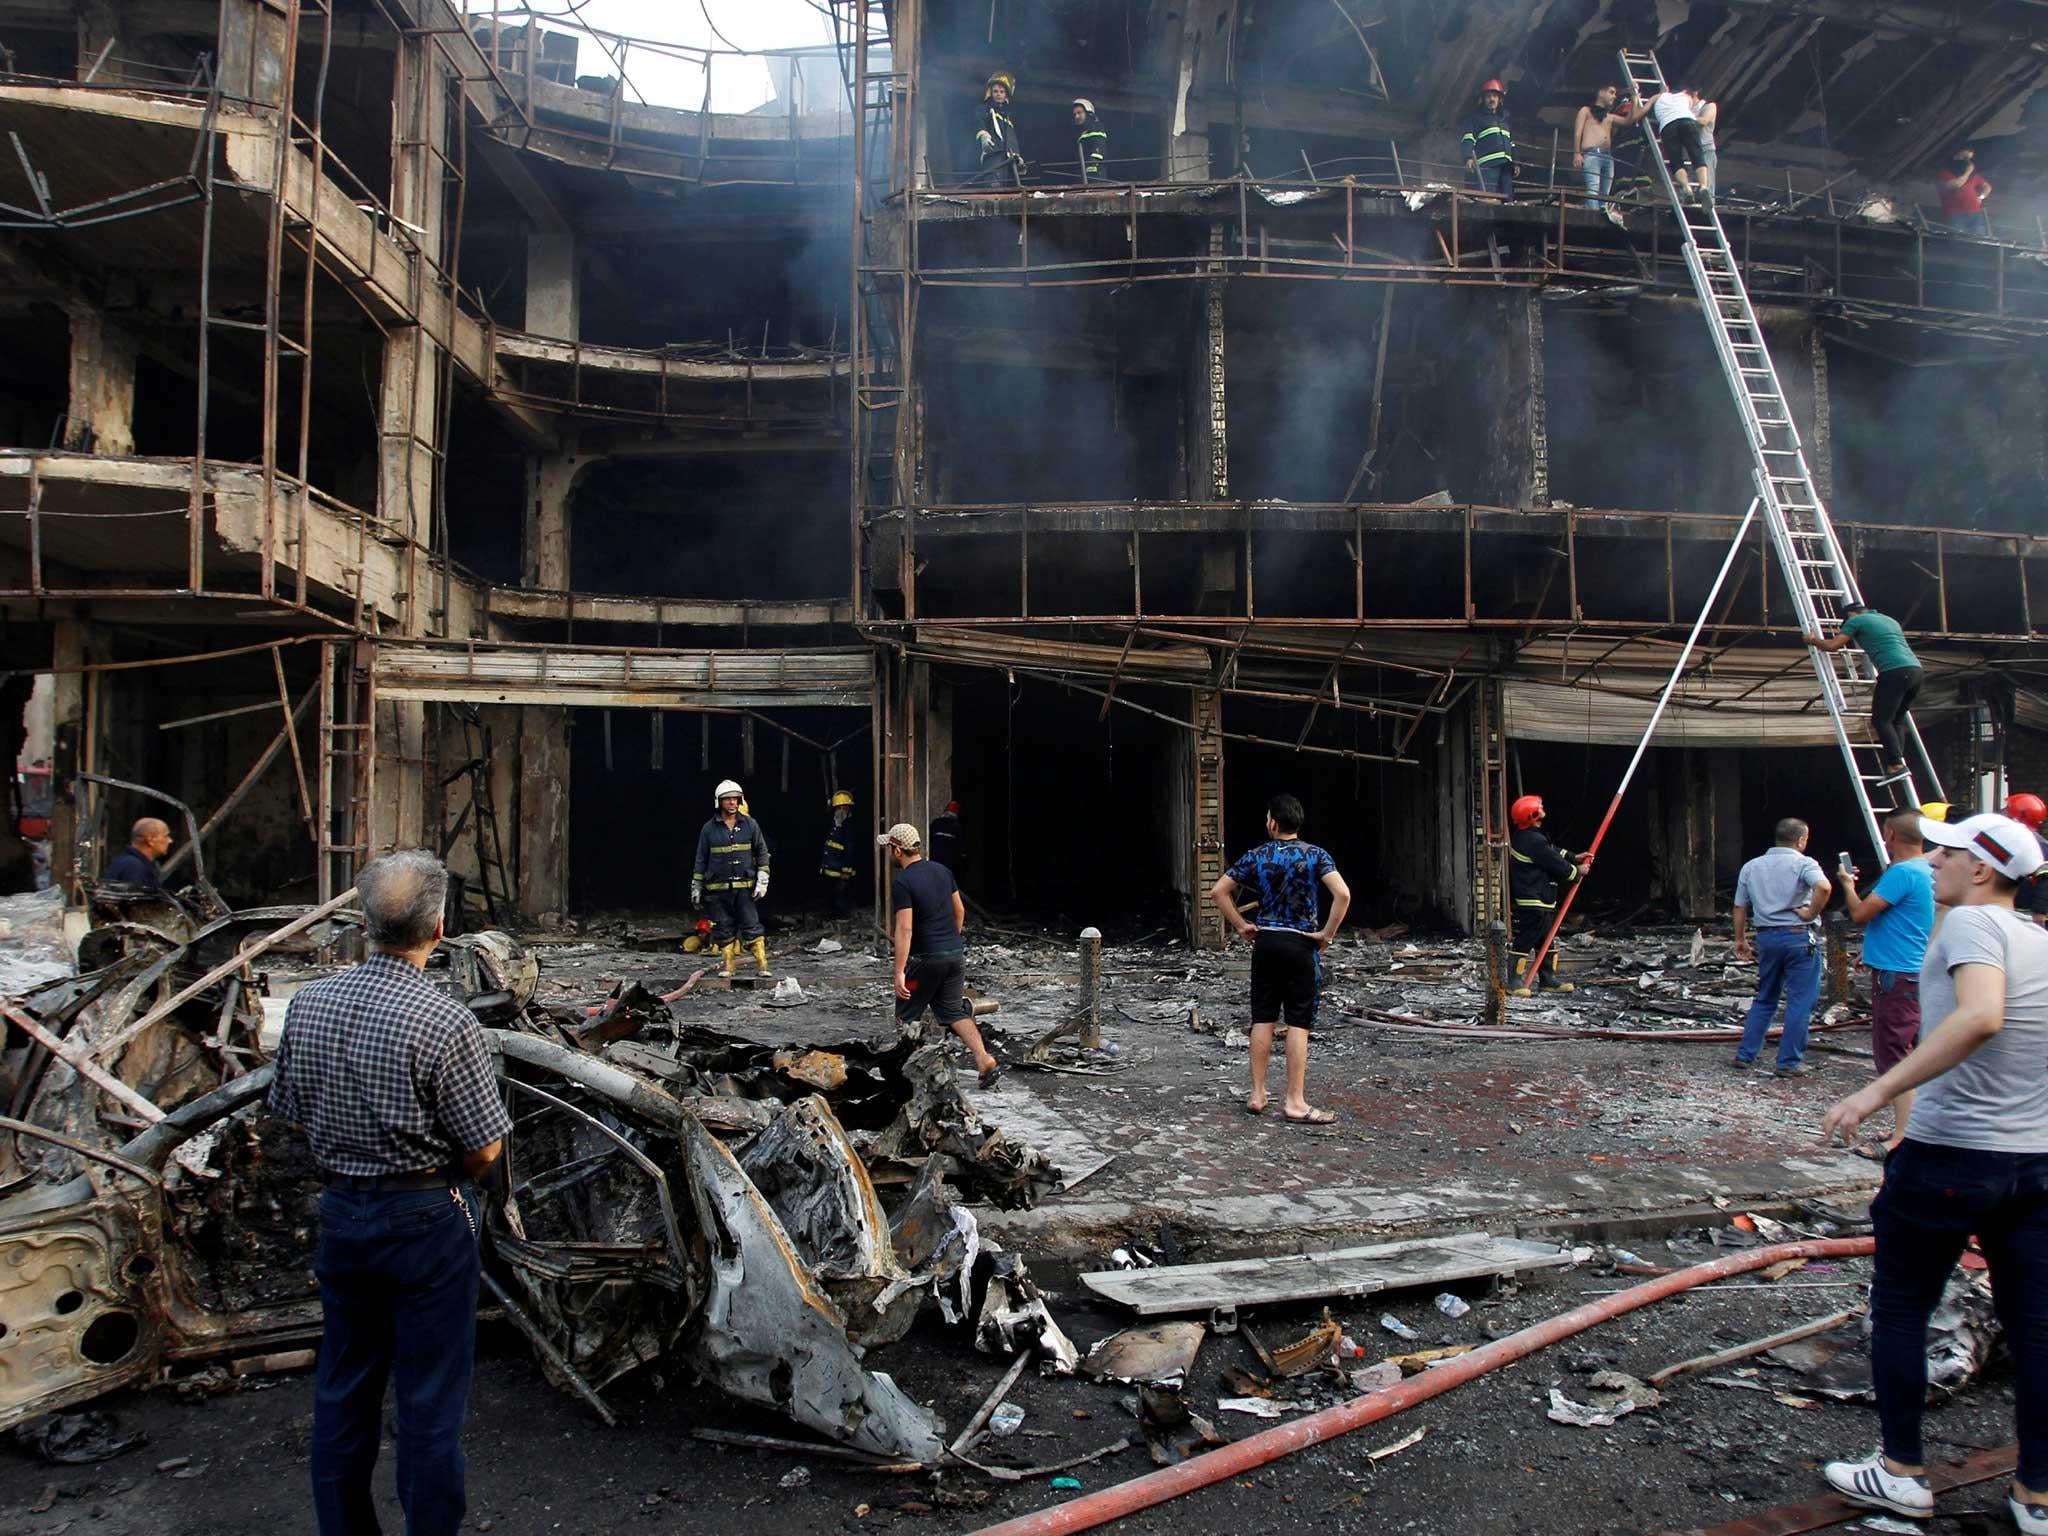 The bombing (not pictured) struck near the scene of another attack that killed more than 300 victims in July